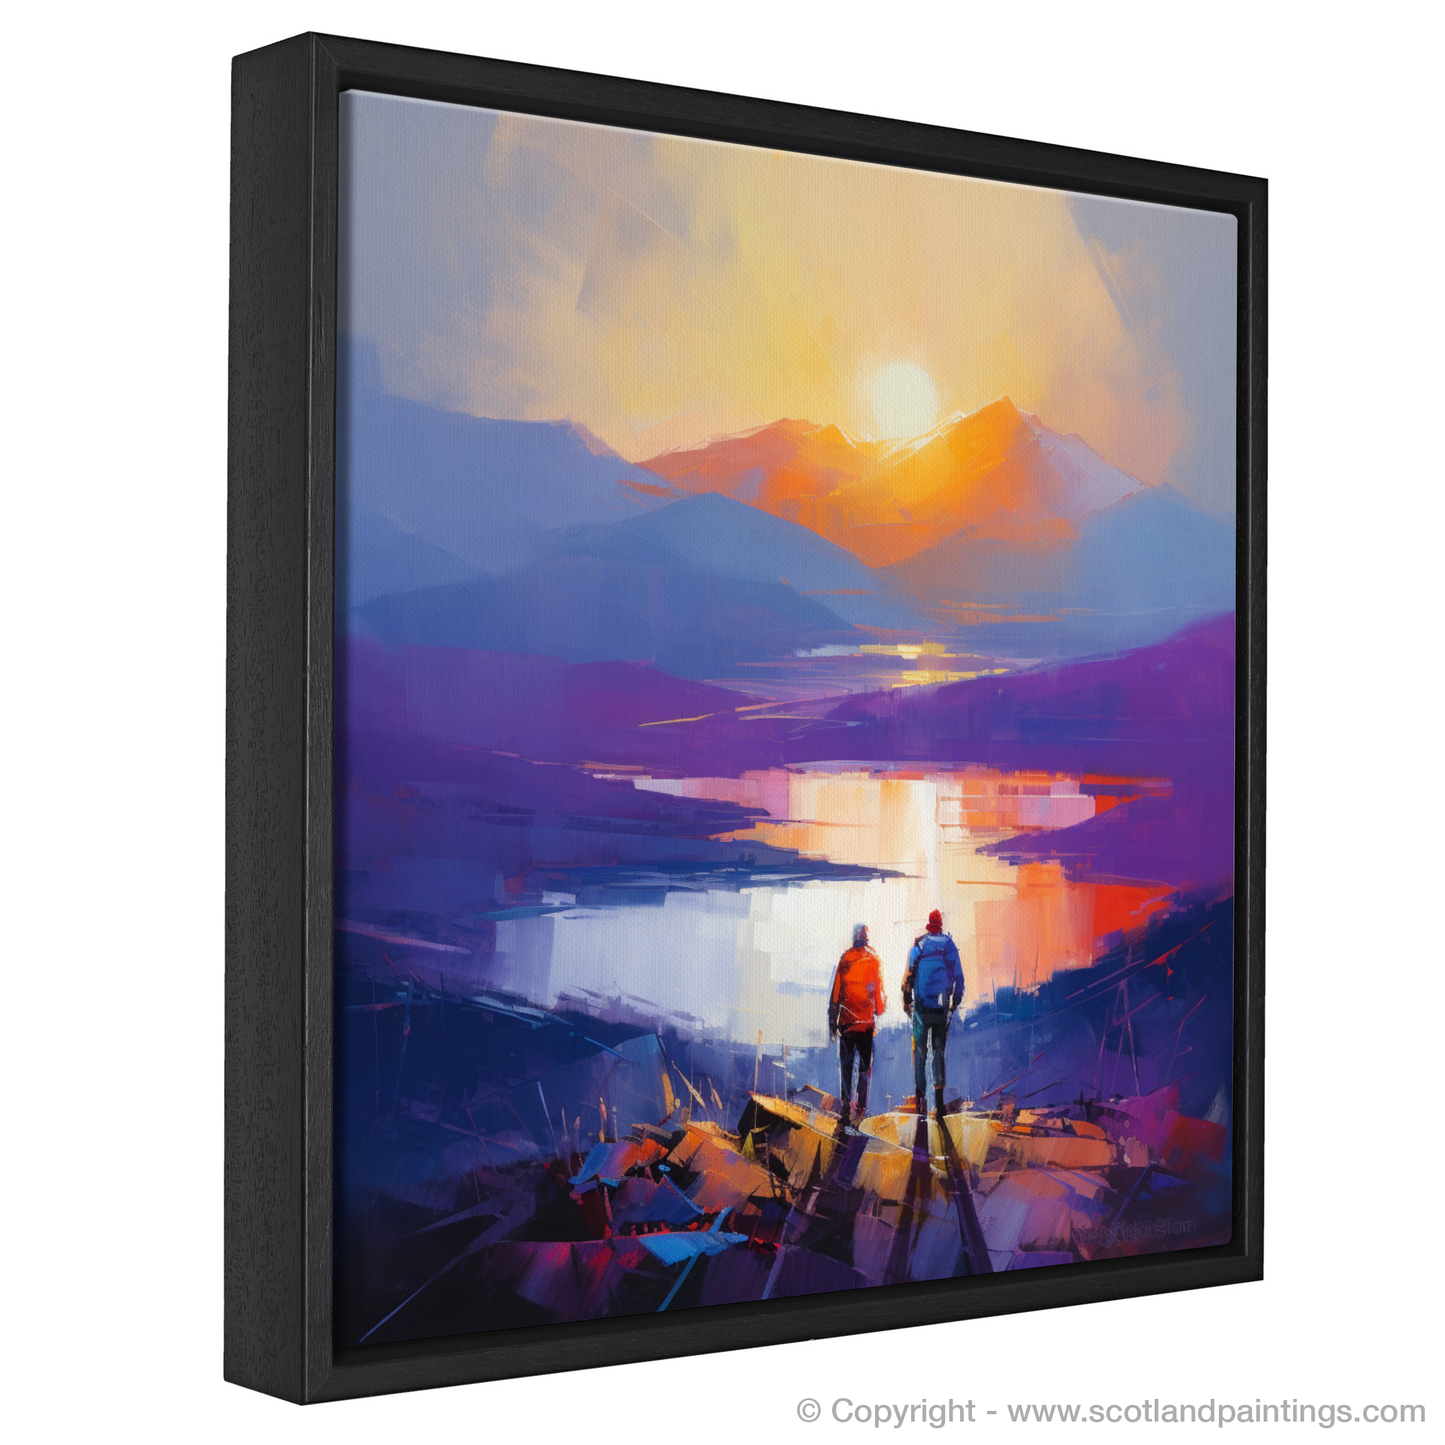 Painting and Art Print of Two hikers looking out on Loch Lomond entitled "Sunset Solace: Two Hikers by Loch Lomond".